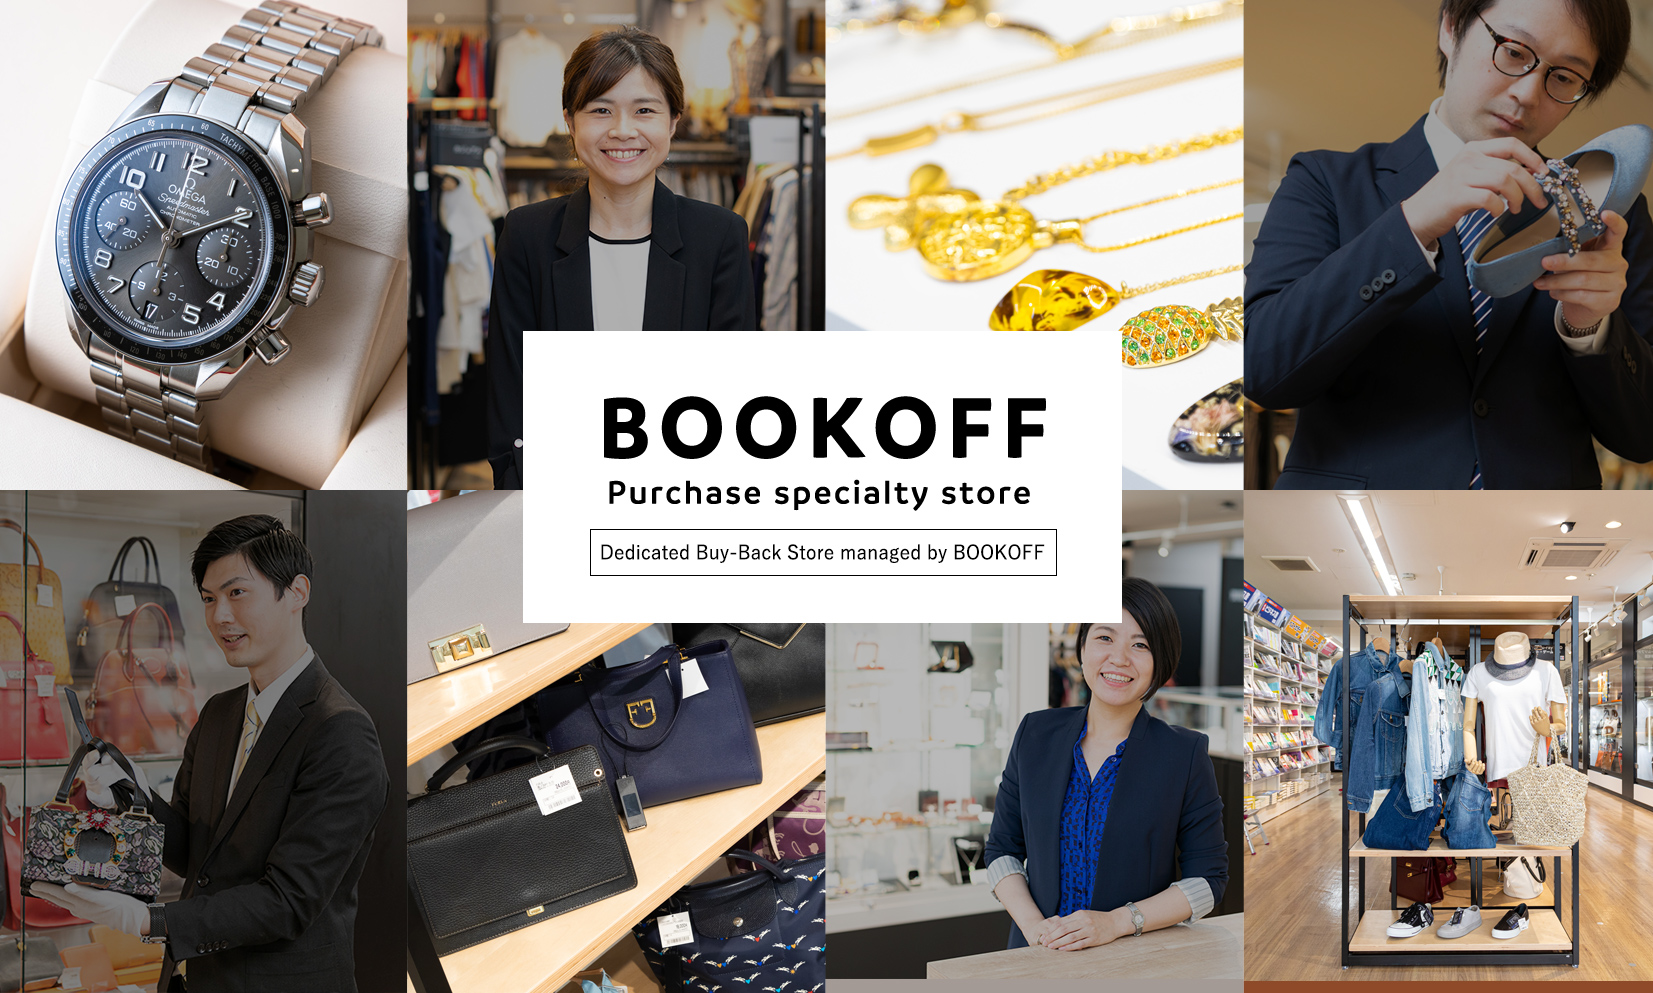 Dedicated Buy-Back Store managed by BOOKOFF